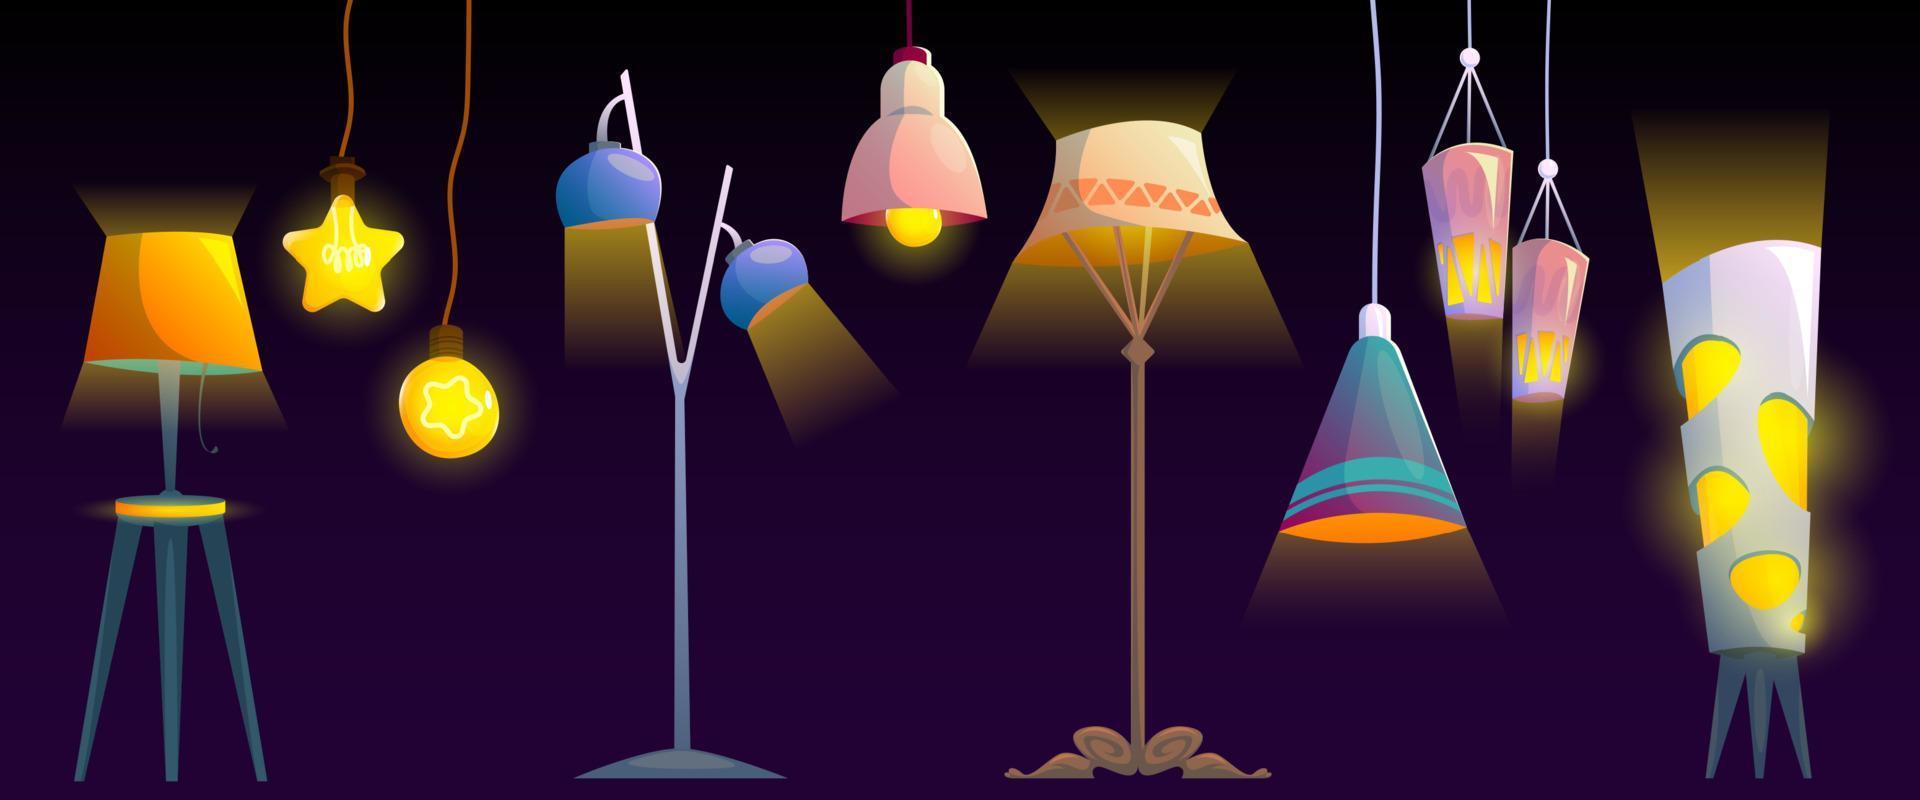 Lamps, ceiling and floor glowing electric bulbs vector